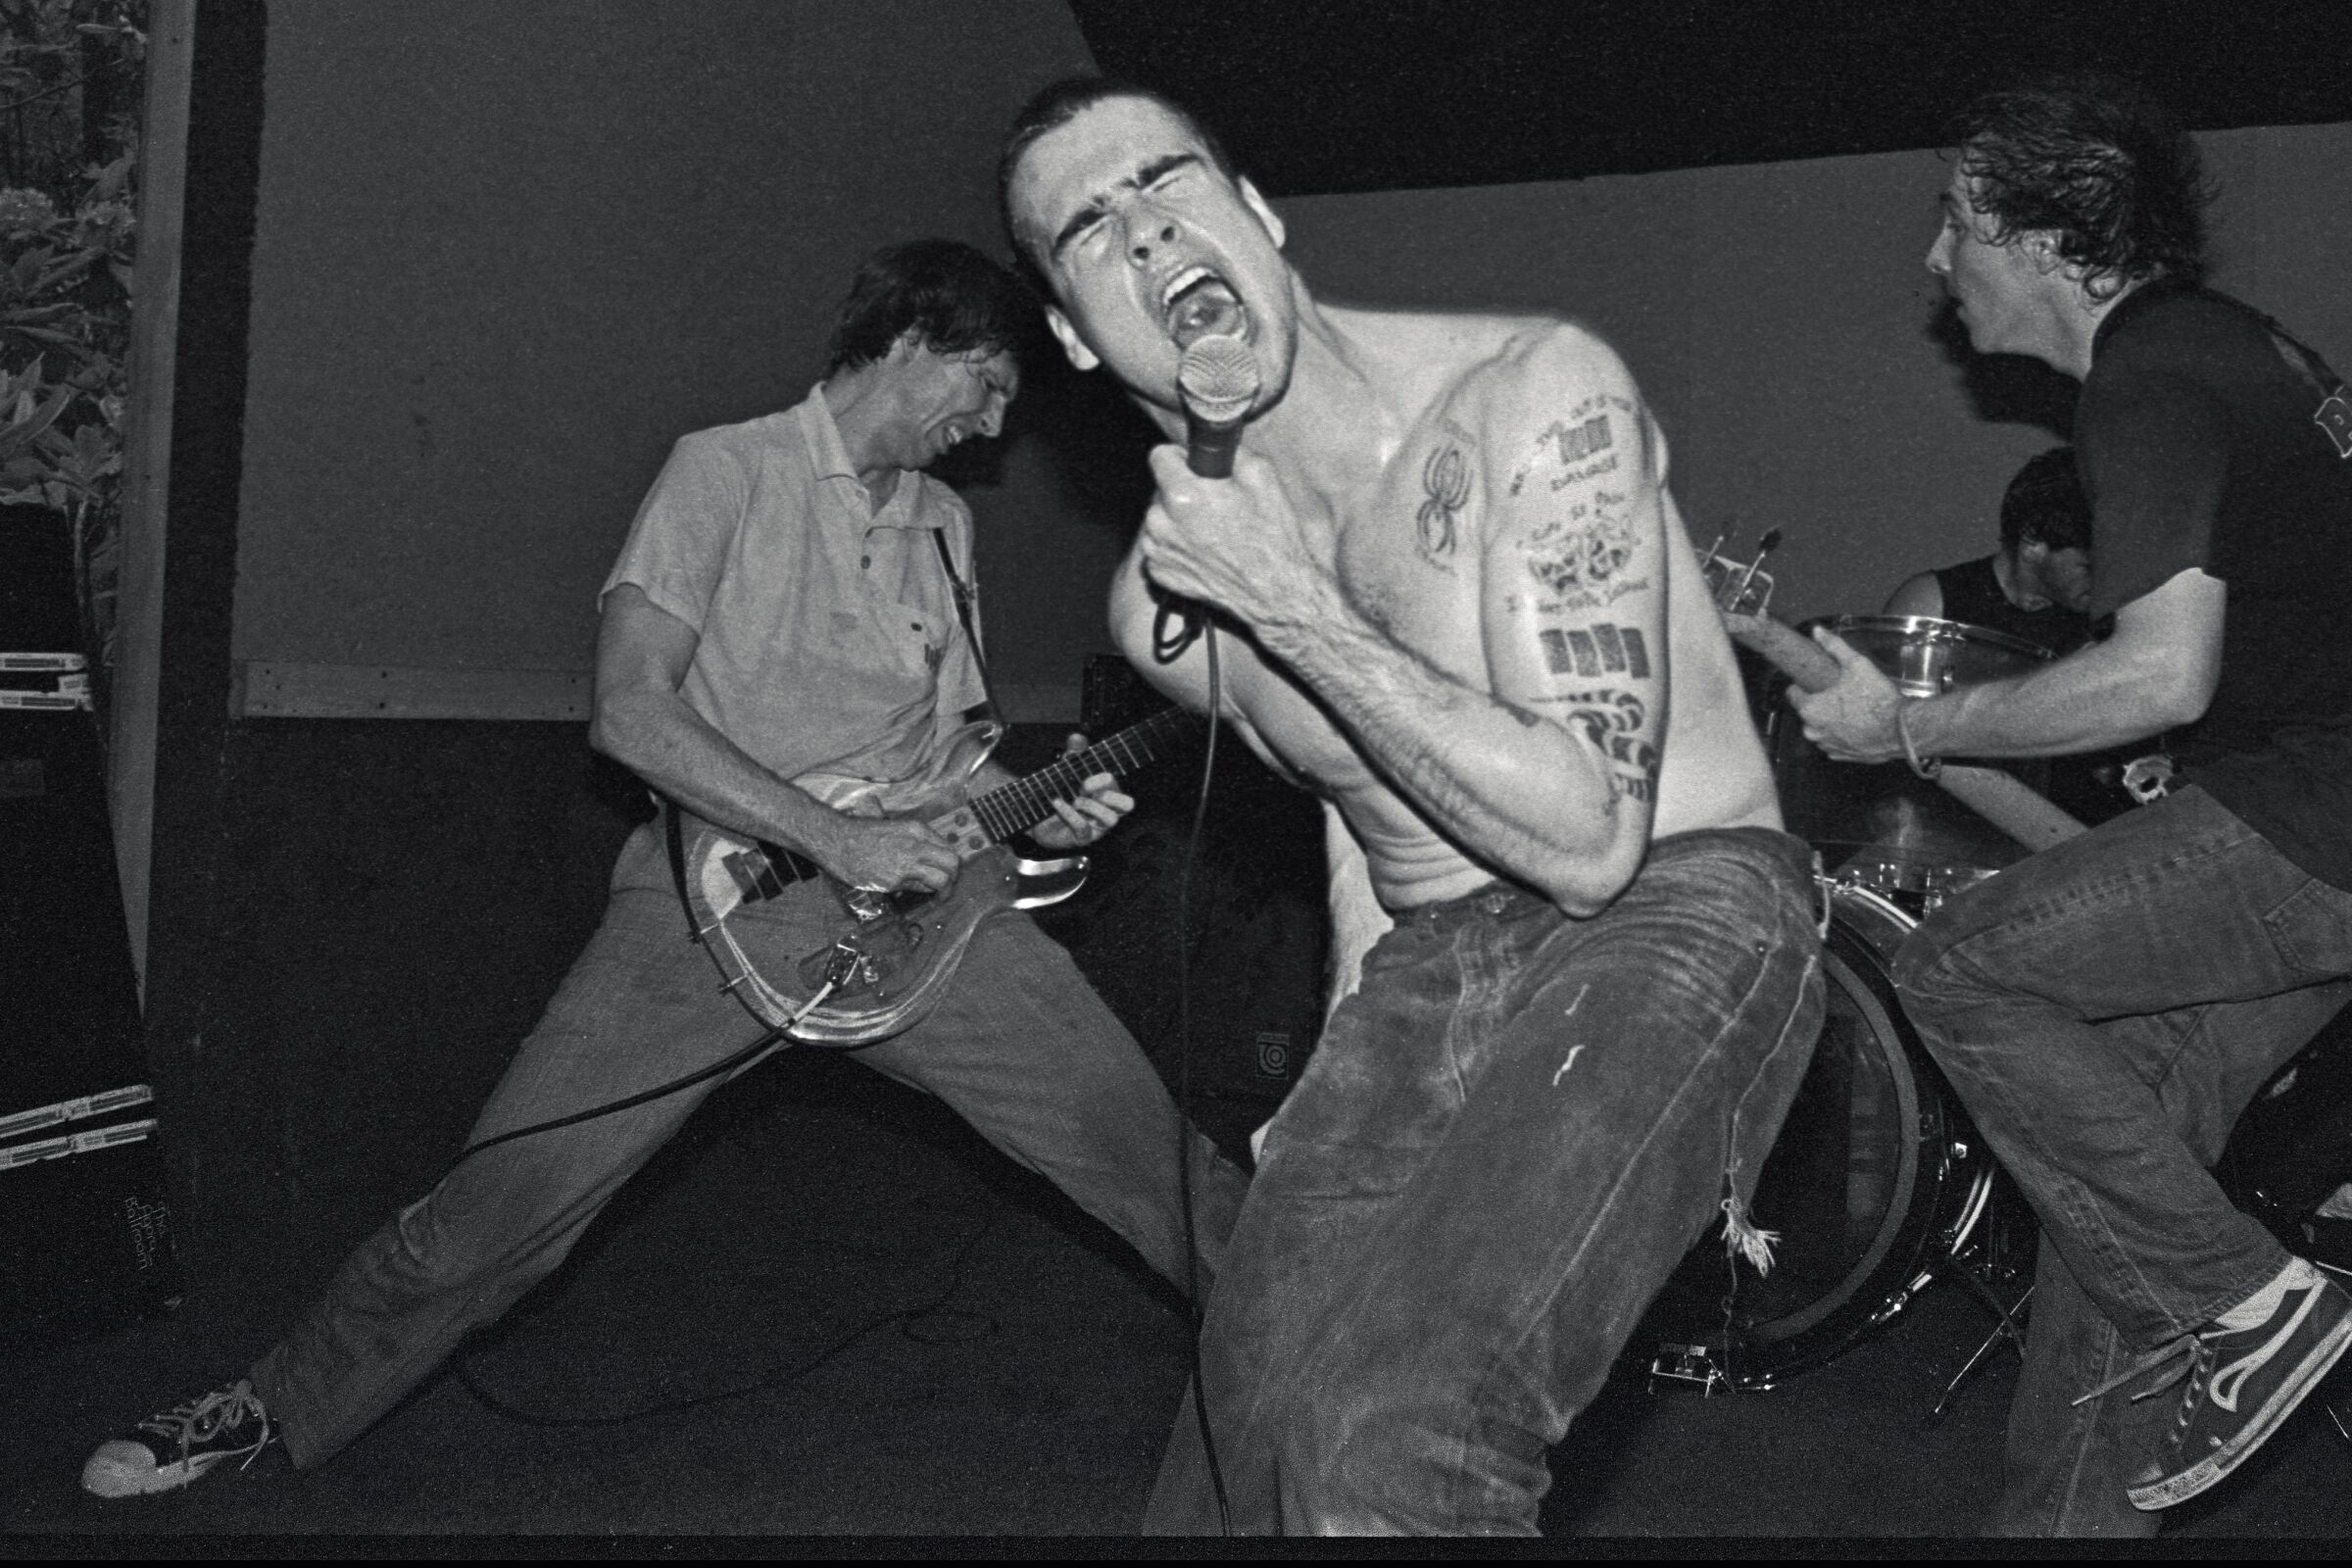 Greg Ginn and Black Flag's Chuck Dukowski jam on guitars while Henry Rollins lets out a yell.